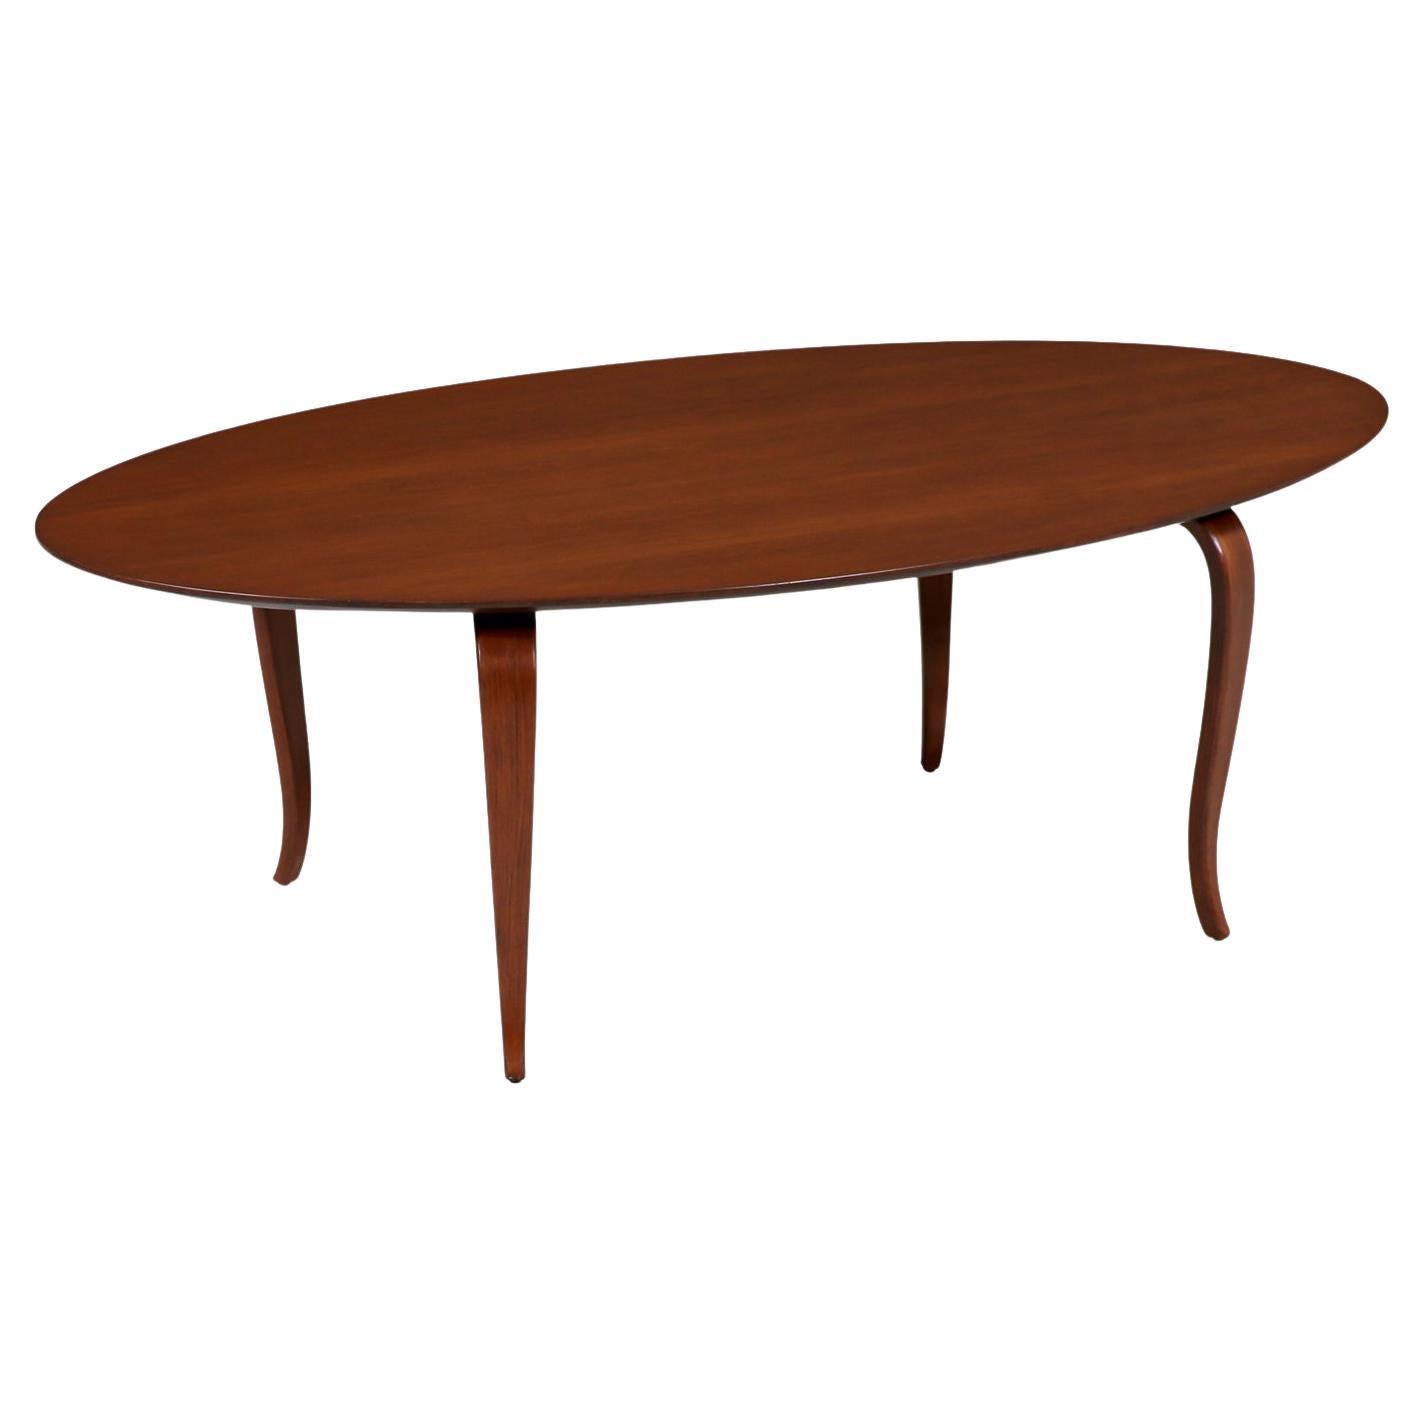 Expertly Restored - Thomas Stender Surfboard Oval Coffee Table for Sigma